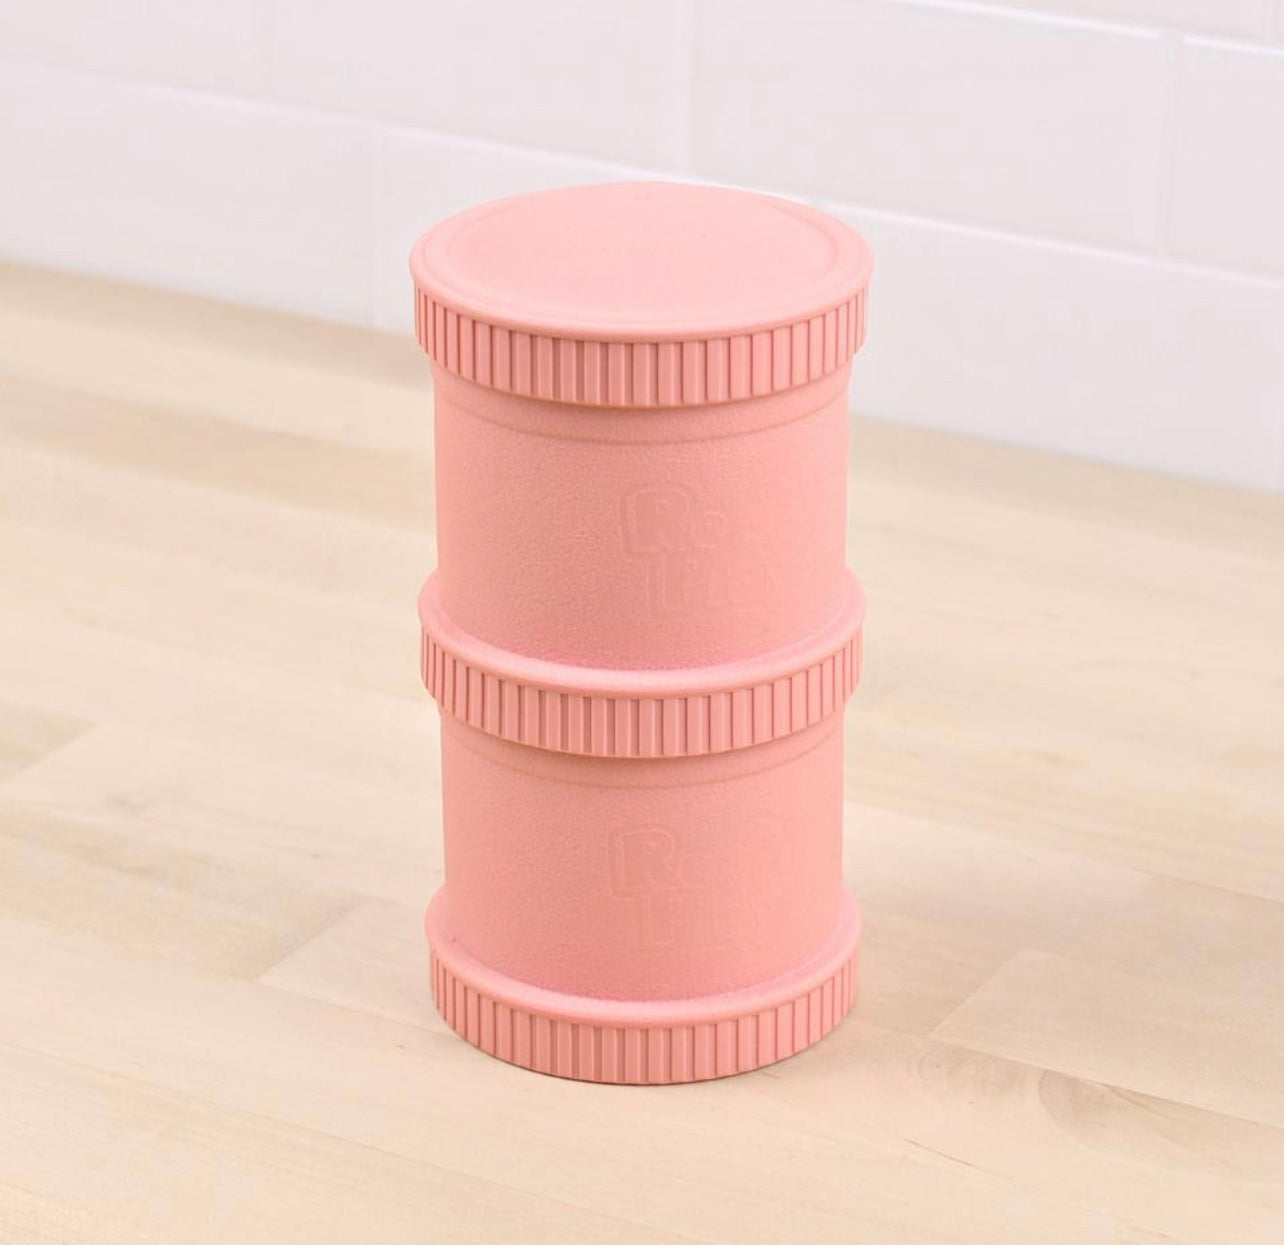 Re-Play Snack Stack - Baby Pink